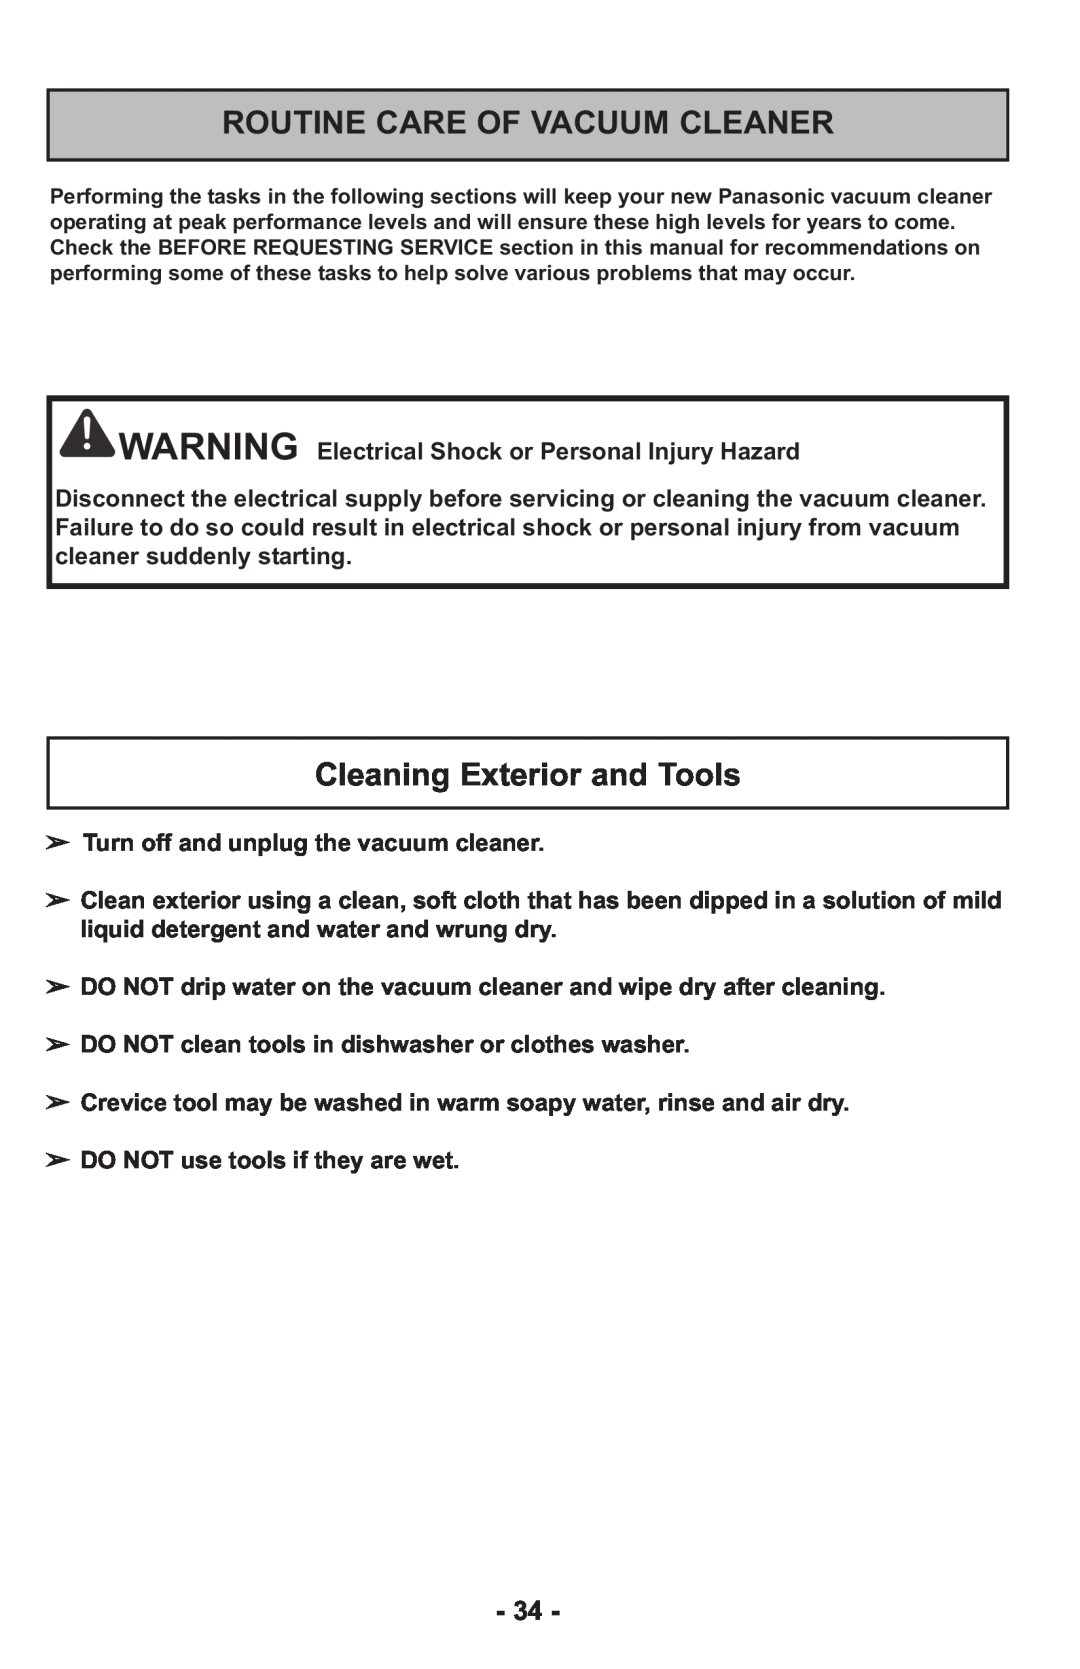 Panasonic MCUL815 operating instructions Routine Care Of Vacuum Cleaner, Cleaning Exterior and Tools 